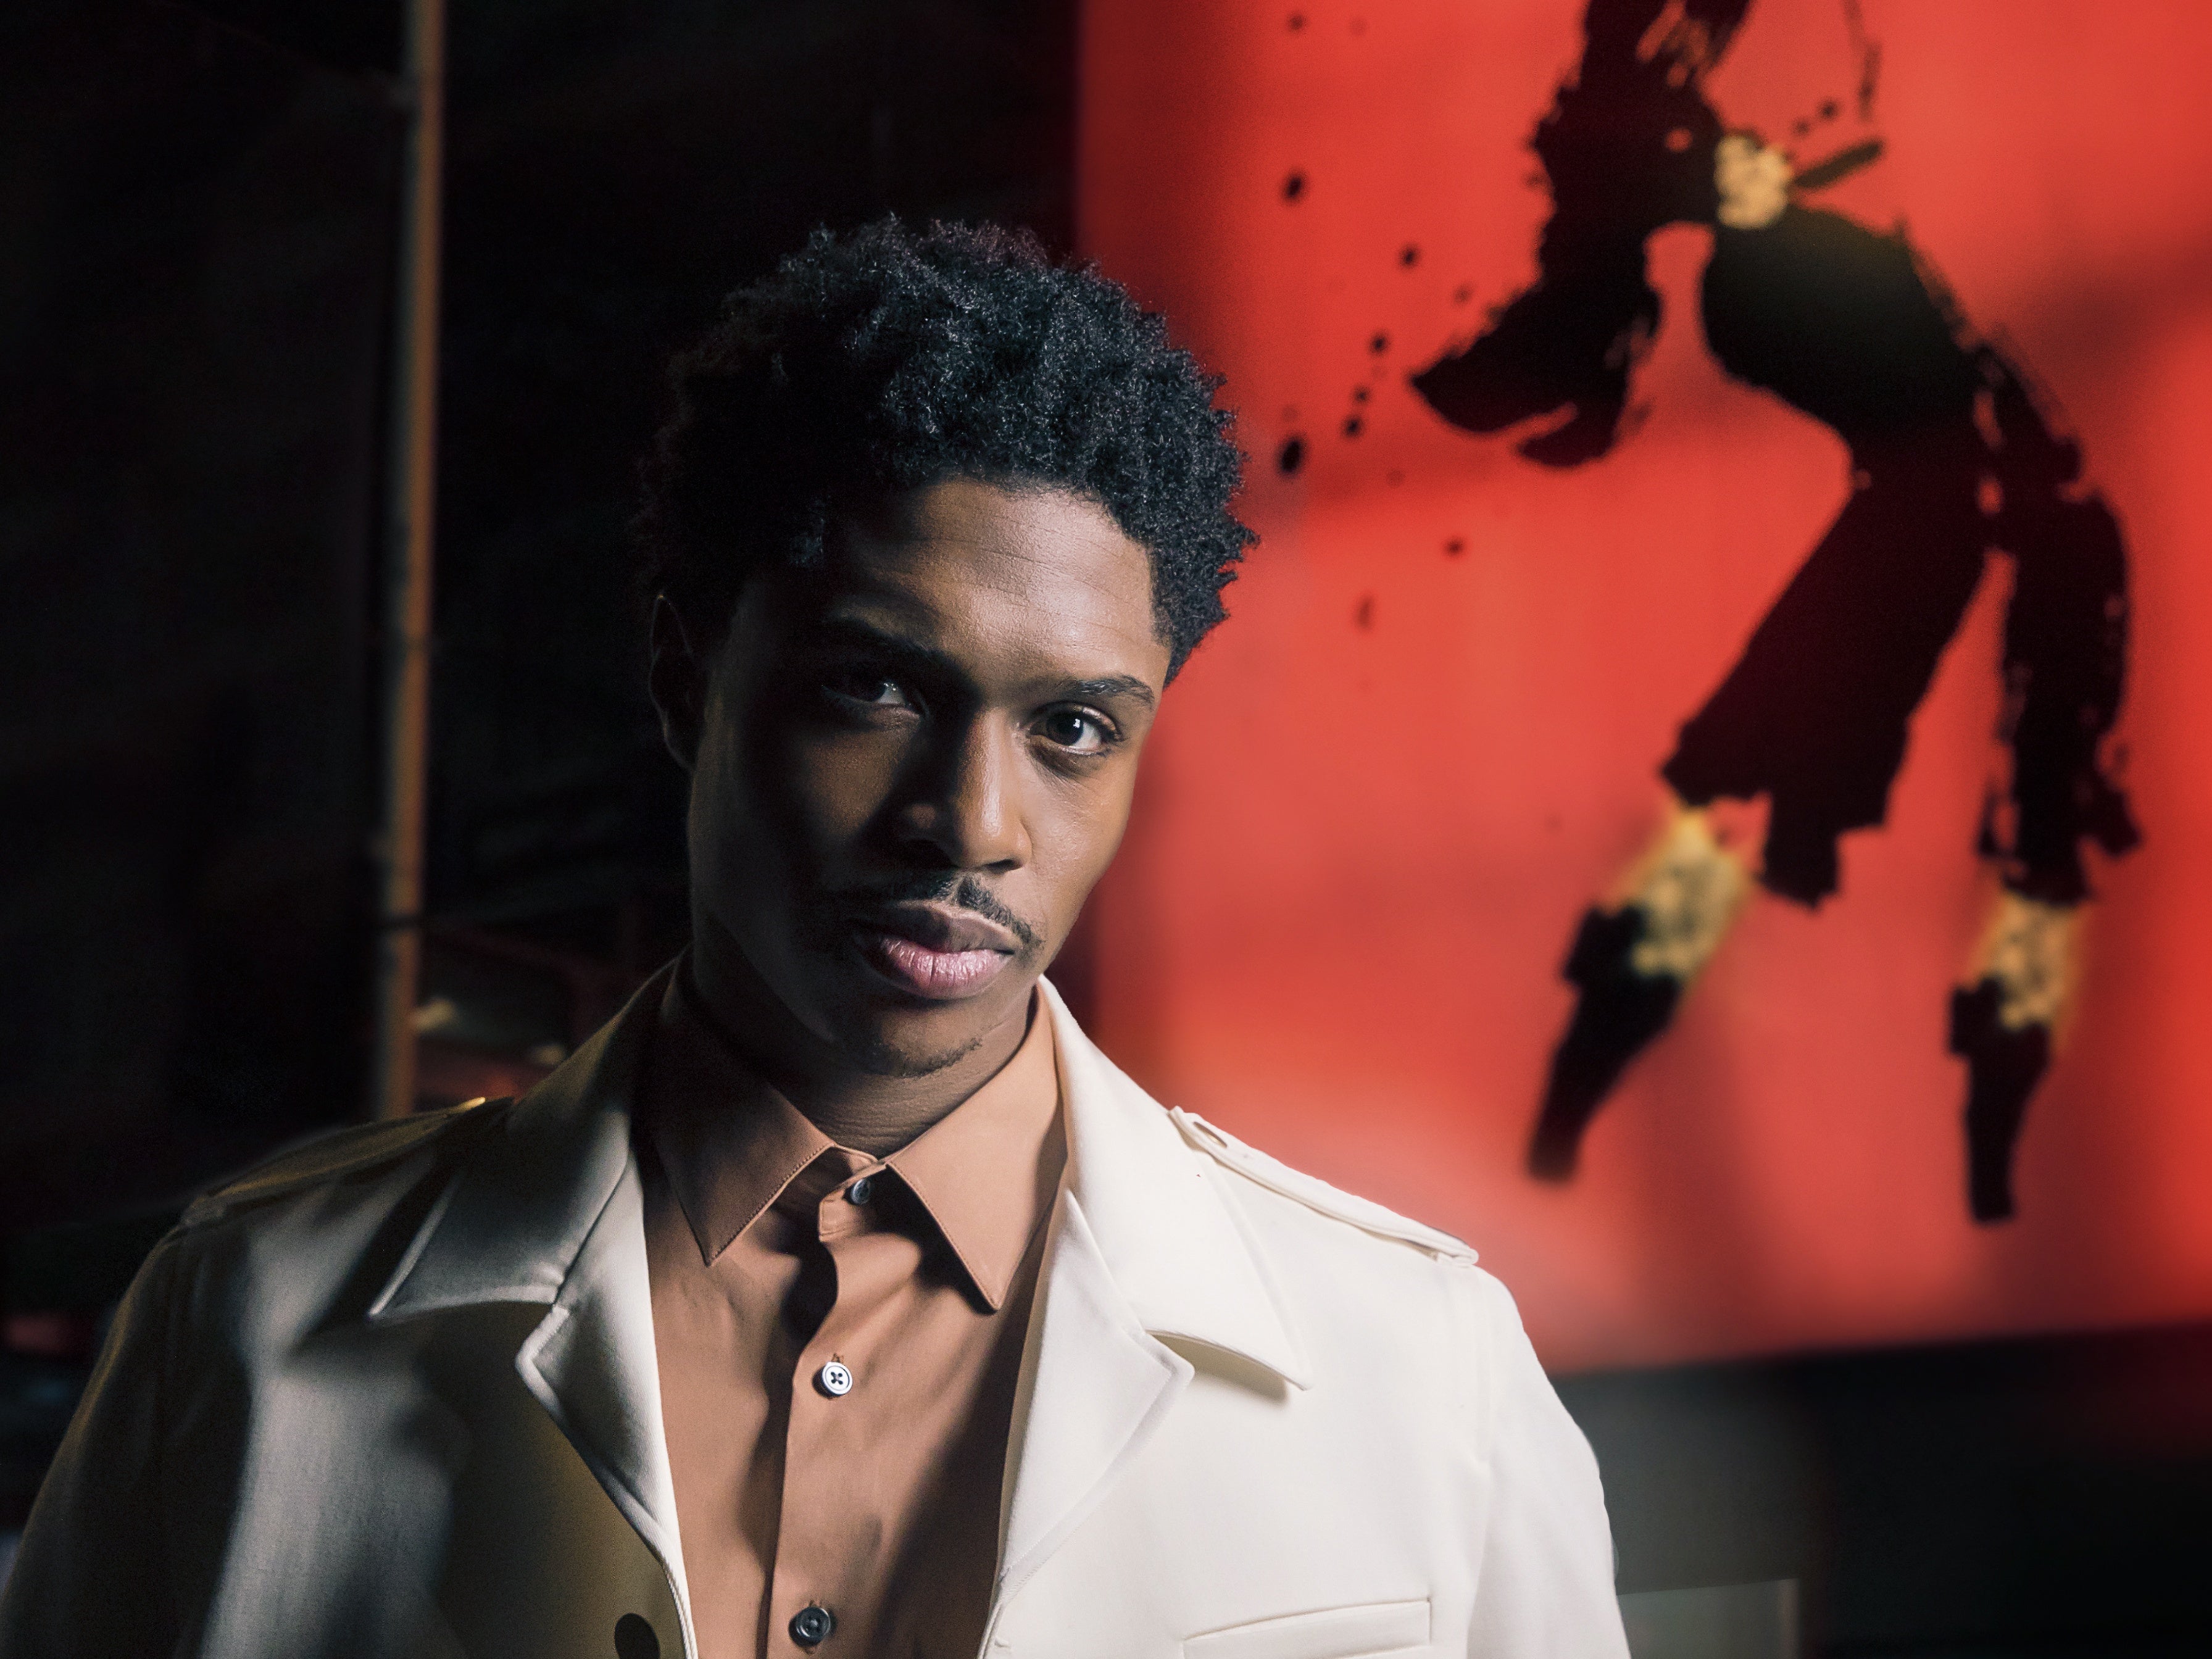 Exclusive: Ephraim Sykes Speaks About Being Cast as Michael Jackson In “MJ” The Musical